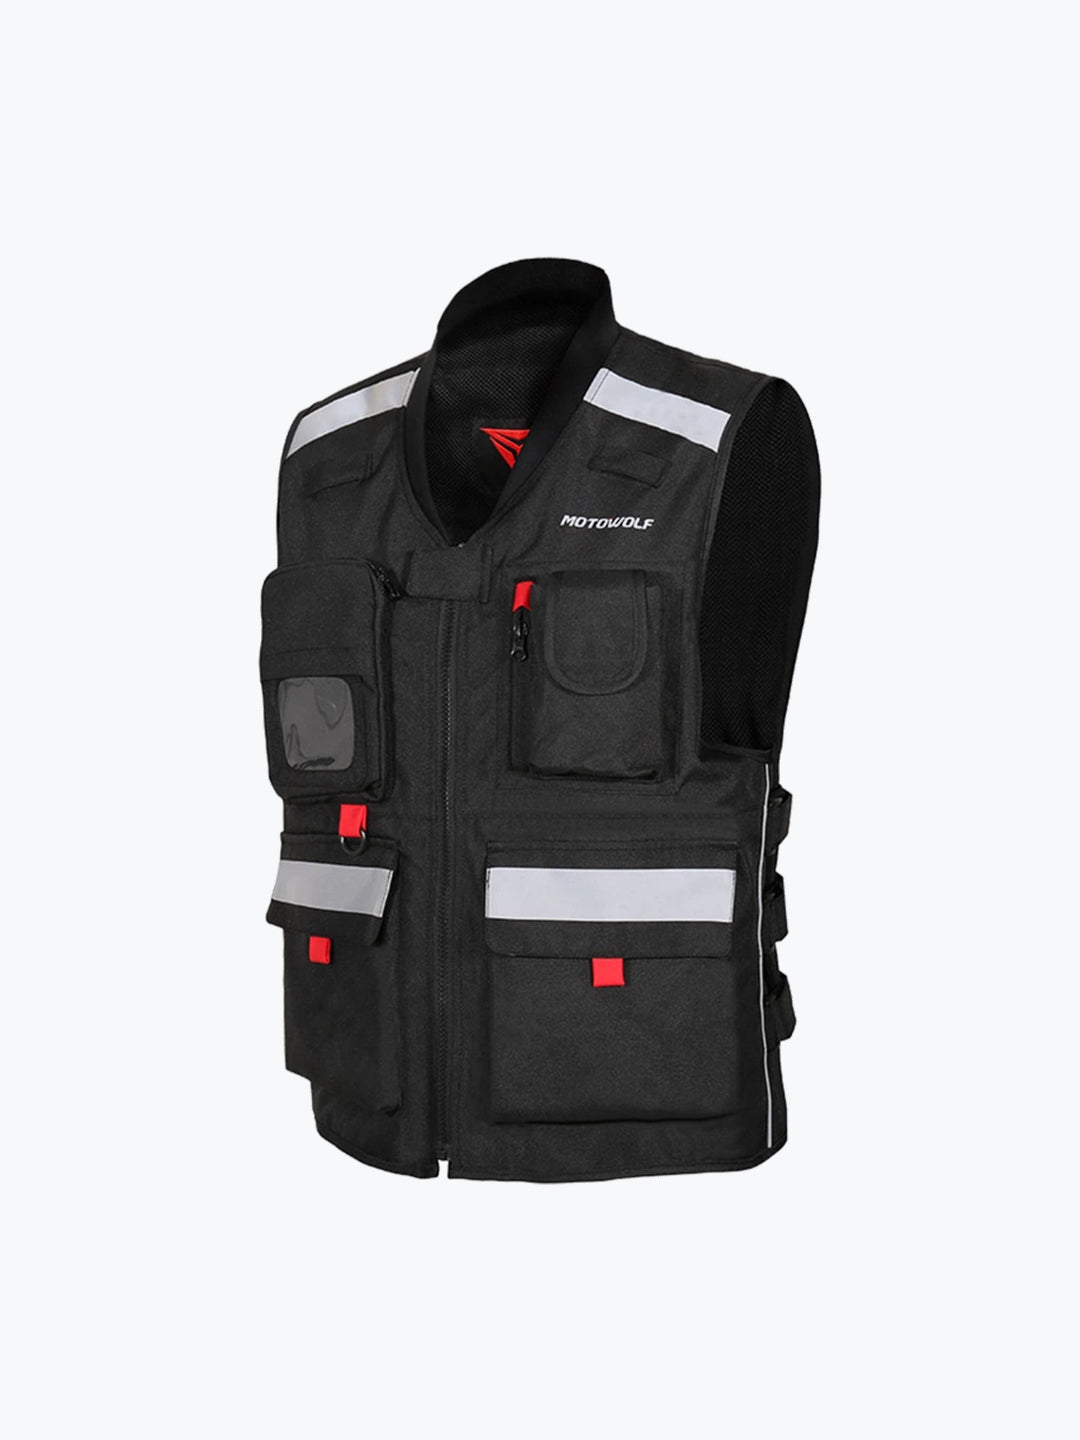 Motowolf Vest With Out Pad Black 0504